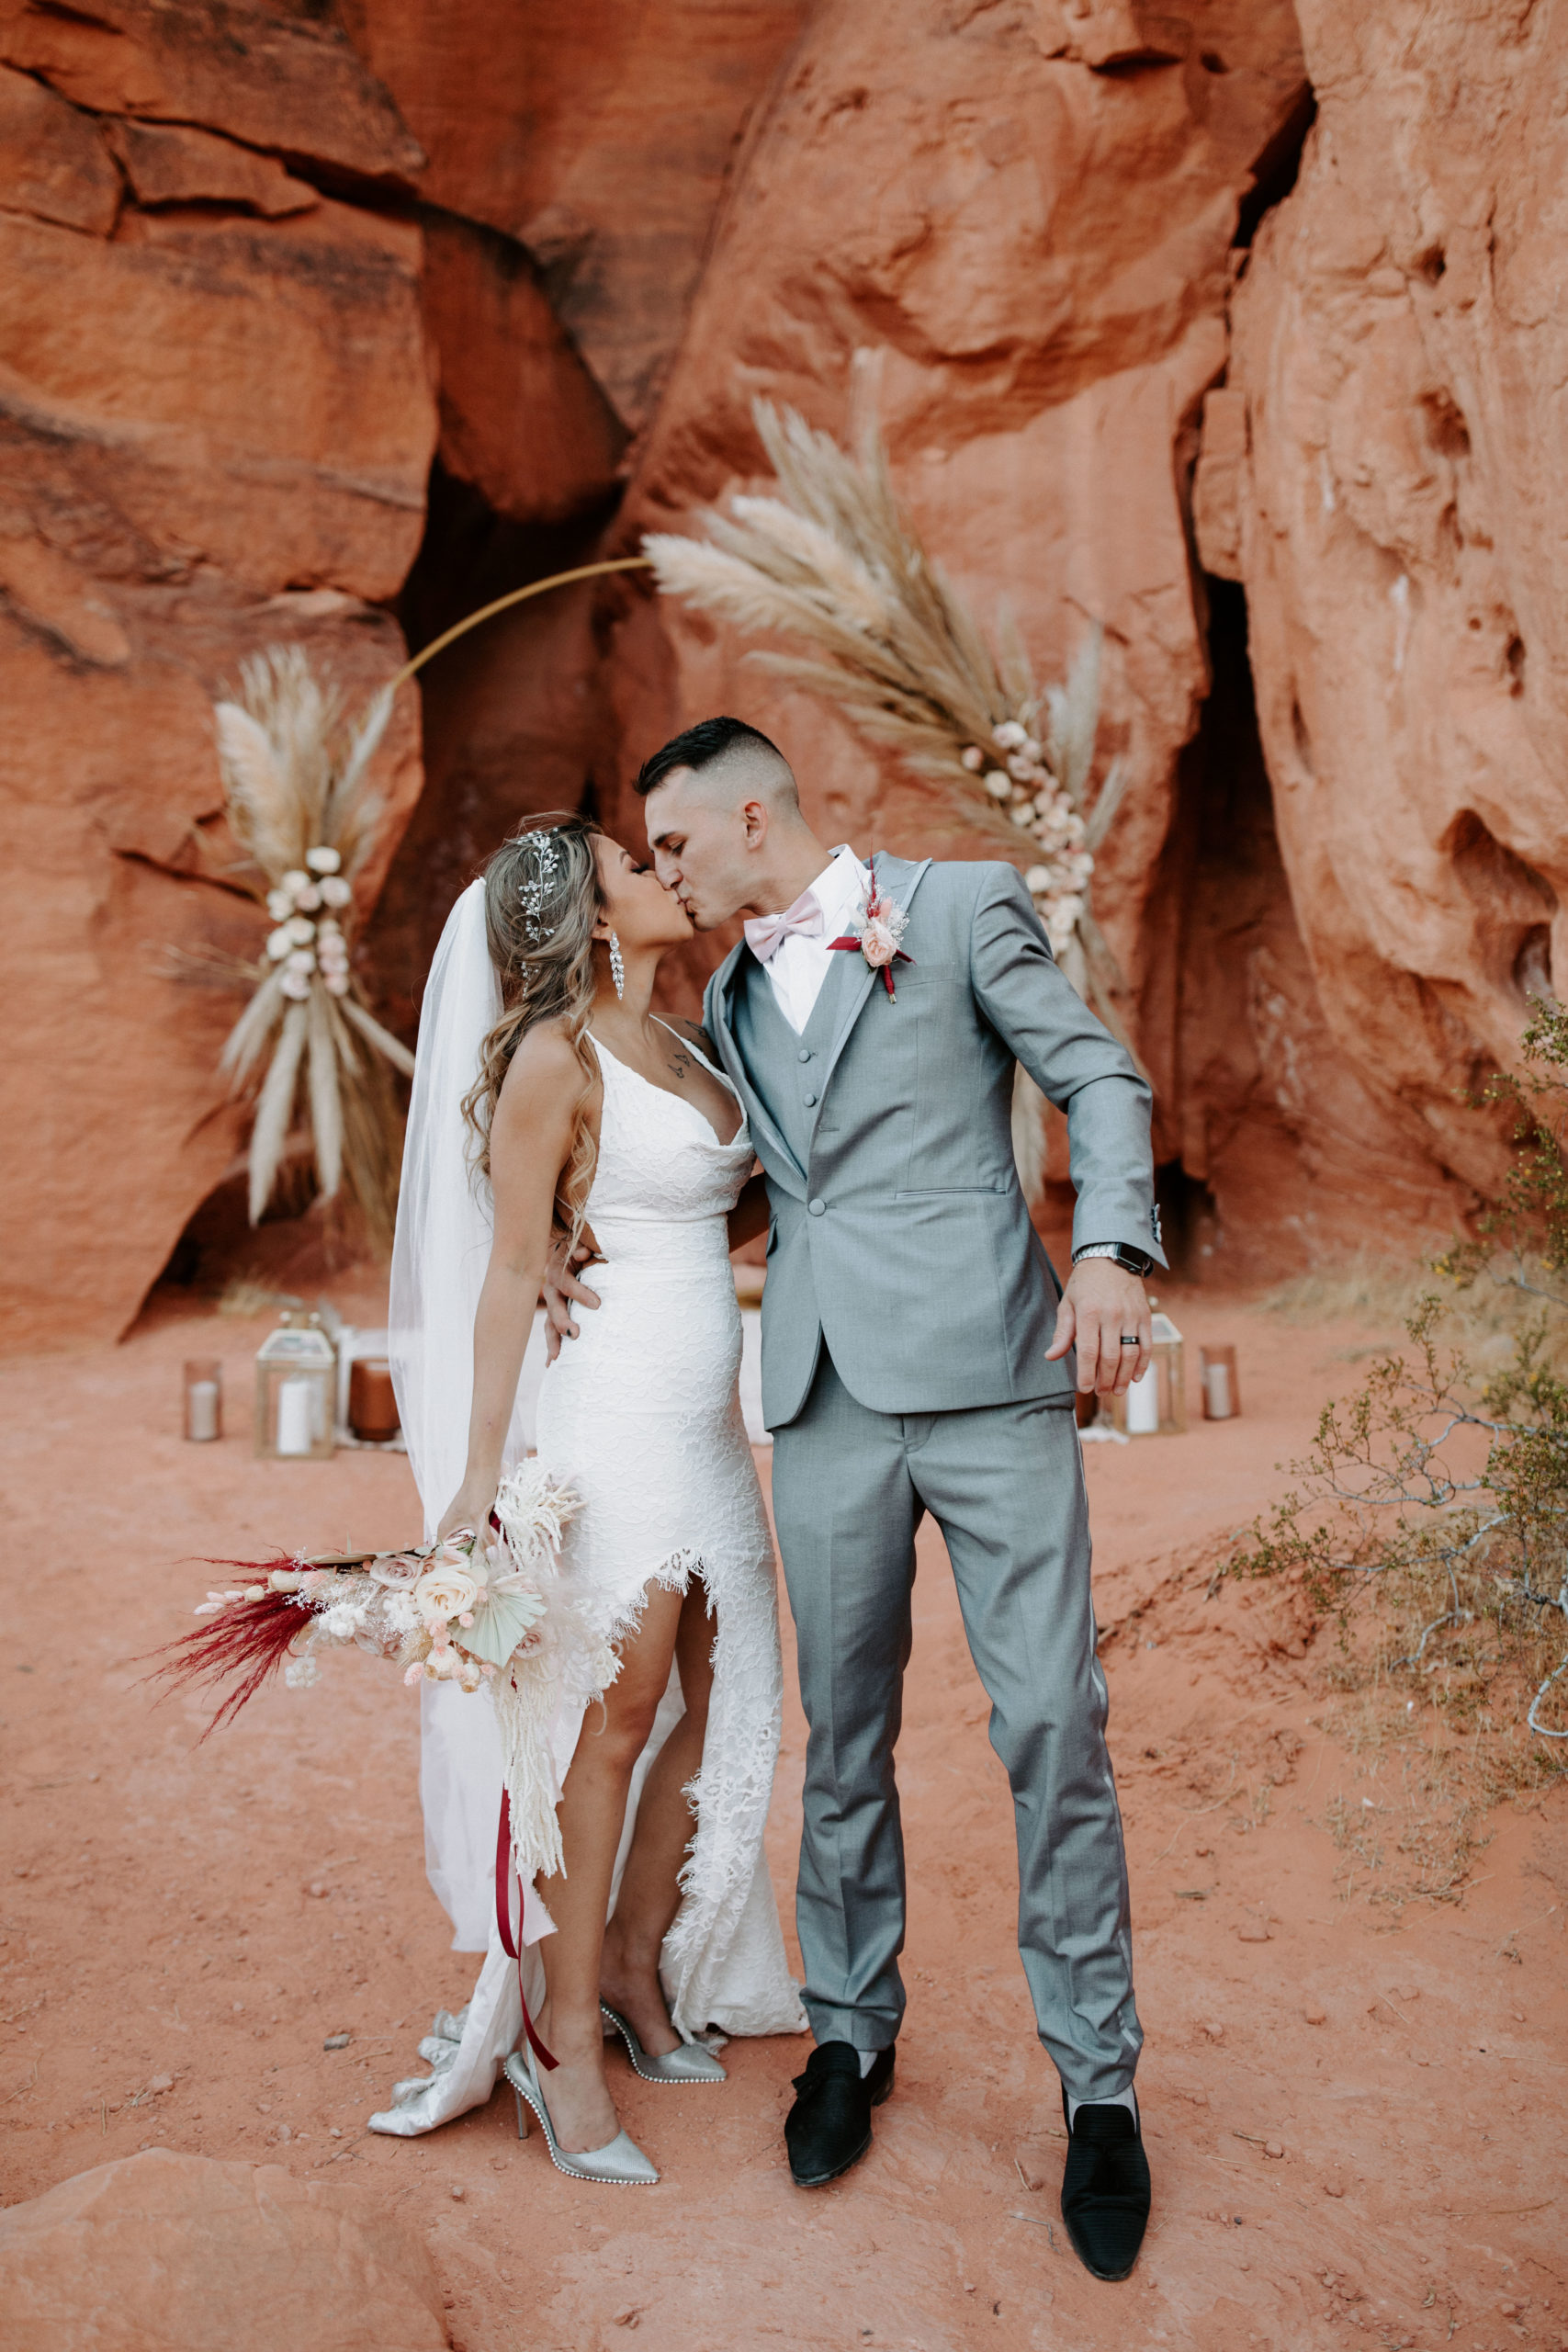 Newlyweds kissing after Boho Pampas Desert Elopement. Groom wearing gray suit with pink bowtie and bride in lace bridal gown with leg slit for monochromatic light pink theme with red accent  